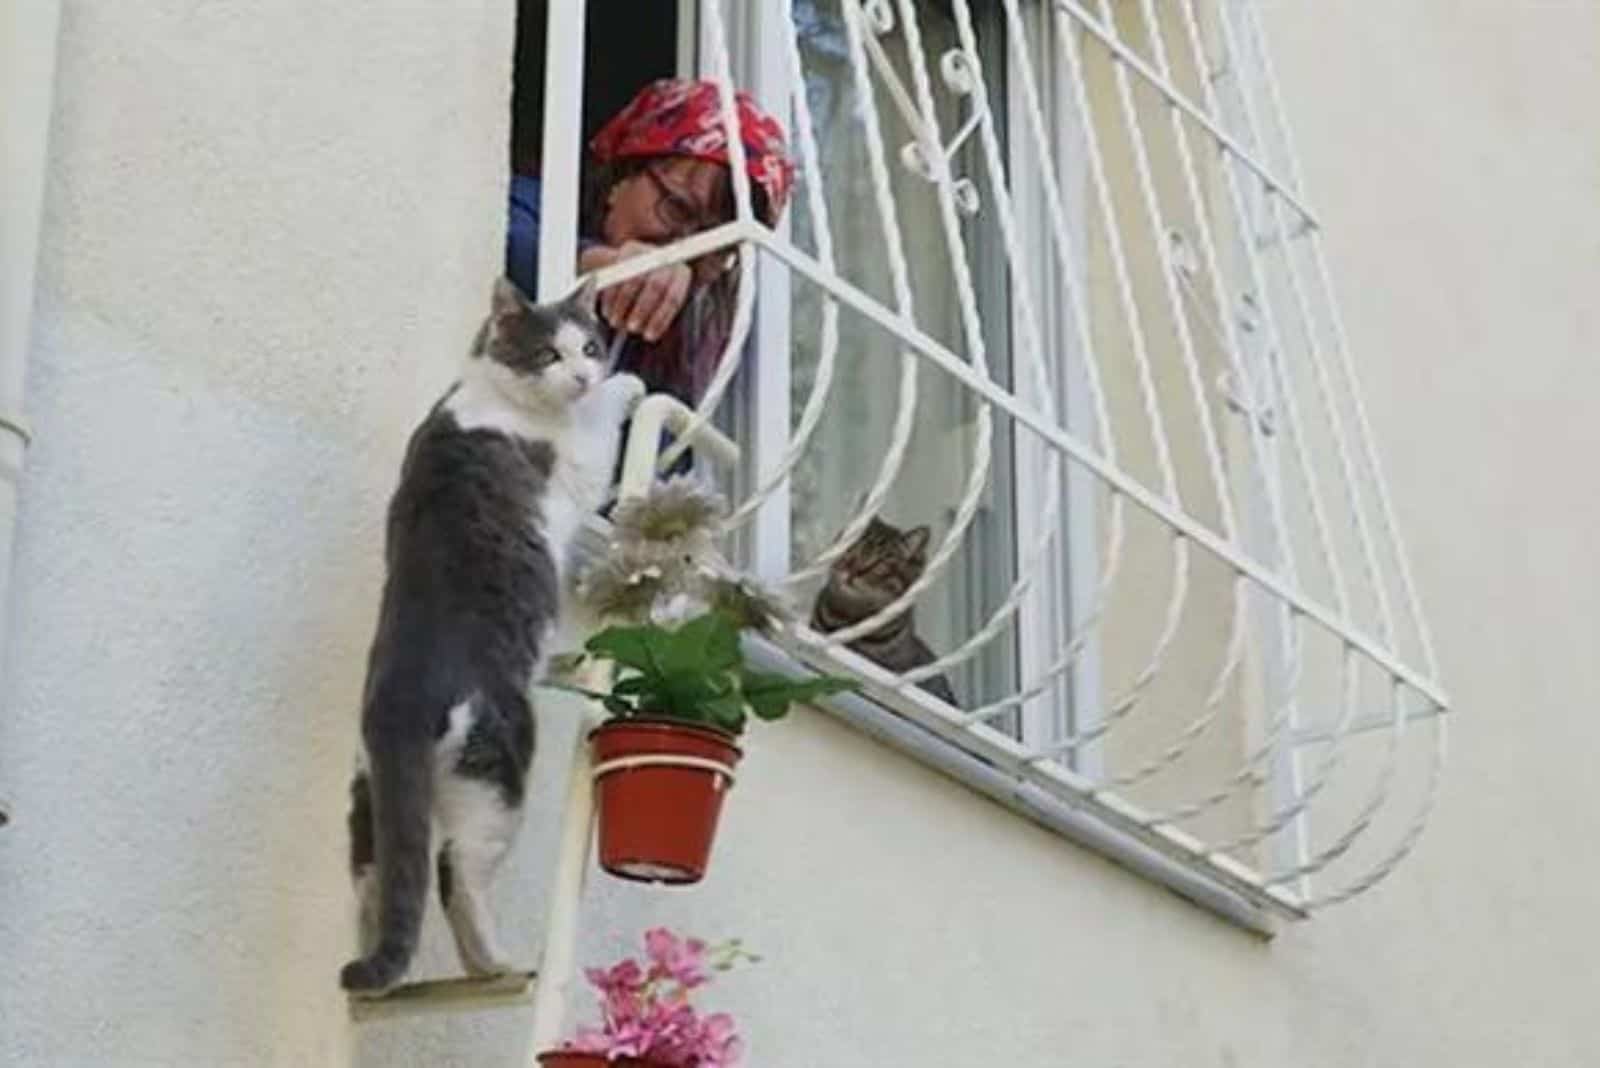 Cat climbing on the ladder while Ilhan tries to pet it